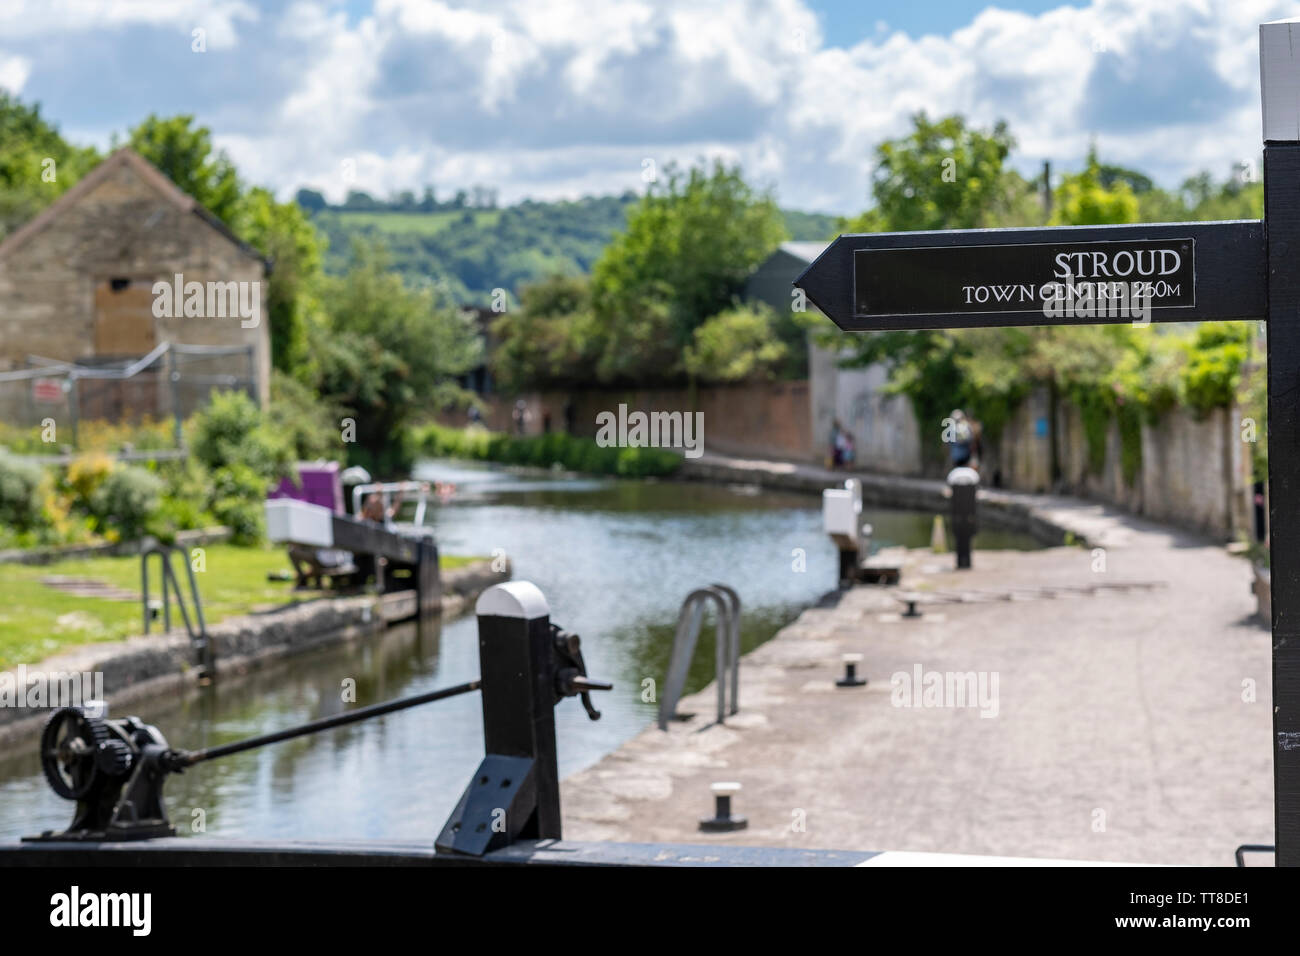 Thames and Severn canal and footpath on sunny day with sign for Stroud town centre. Stroud, Gloucestershire, United Kingdom Stock Photo